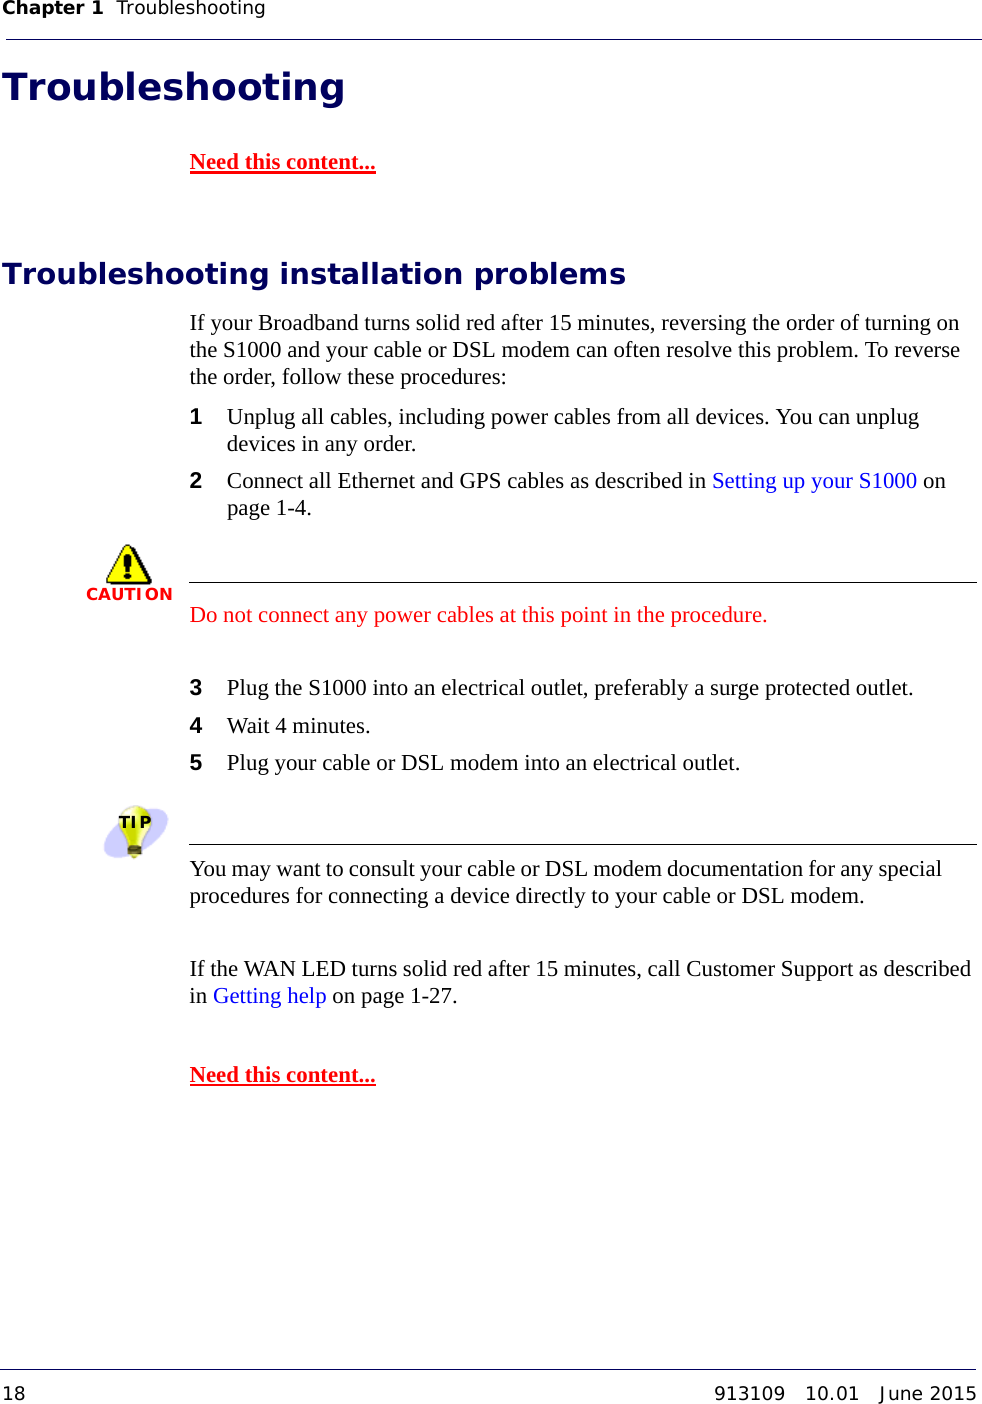 Chapter 1   Troubleshooting 18 913109   10.01   June 2015DRAFTTroubleshooting Need this content...Troubleshooting installation problemsIf your Broadband turns solid red after 15 minutes, reversing the order of turning on the S1000 and your cable or DSL modem can often resolve this problem. To reverse the order, follow these procedures:1Unplug all cables, including power cables from all devices. You can unplug devices in any order.2Connect all Ethernet and GPS cables as described in Setting up your S1000 on page 1-4.CAUTIONDo not connect any power cables at this point in the procedure.3Plug the S1000 into an electrical outlet, preferably a surge protected outlet.4Wait 4 minutes.5Plug your cable or DSL modem into an electrical outlet.TIPYou may want to consult your cable or DSL modem documentation for any special procedures for connecting a device directly to your cable or DSL modem.If the WAN LED turns solid red after 15 minutes, call Customer Support as described in Getting help on page 1-27.Need this content...